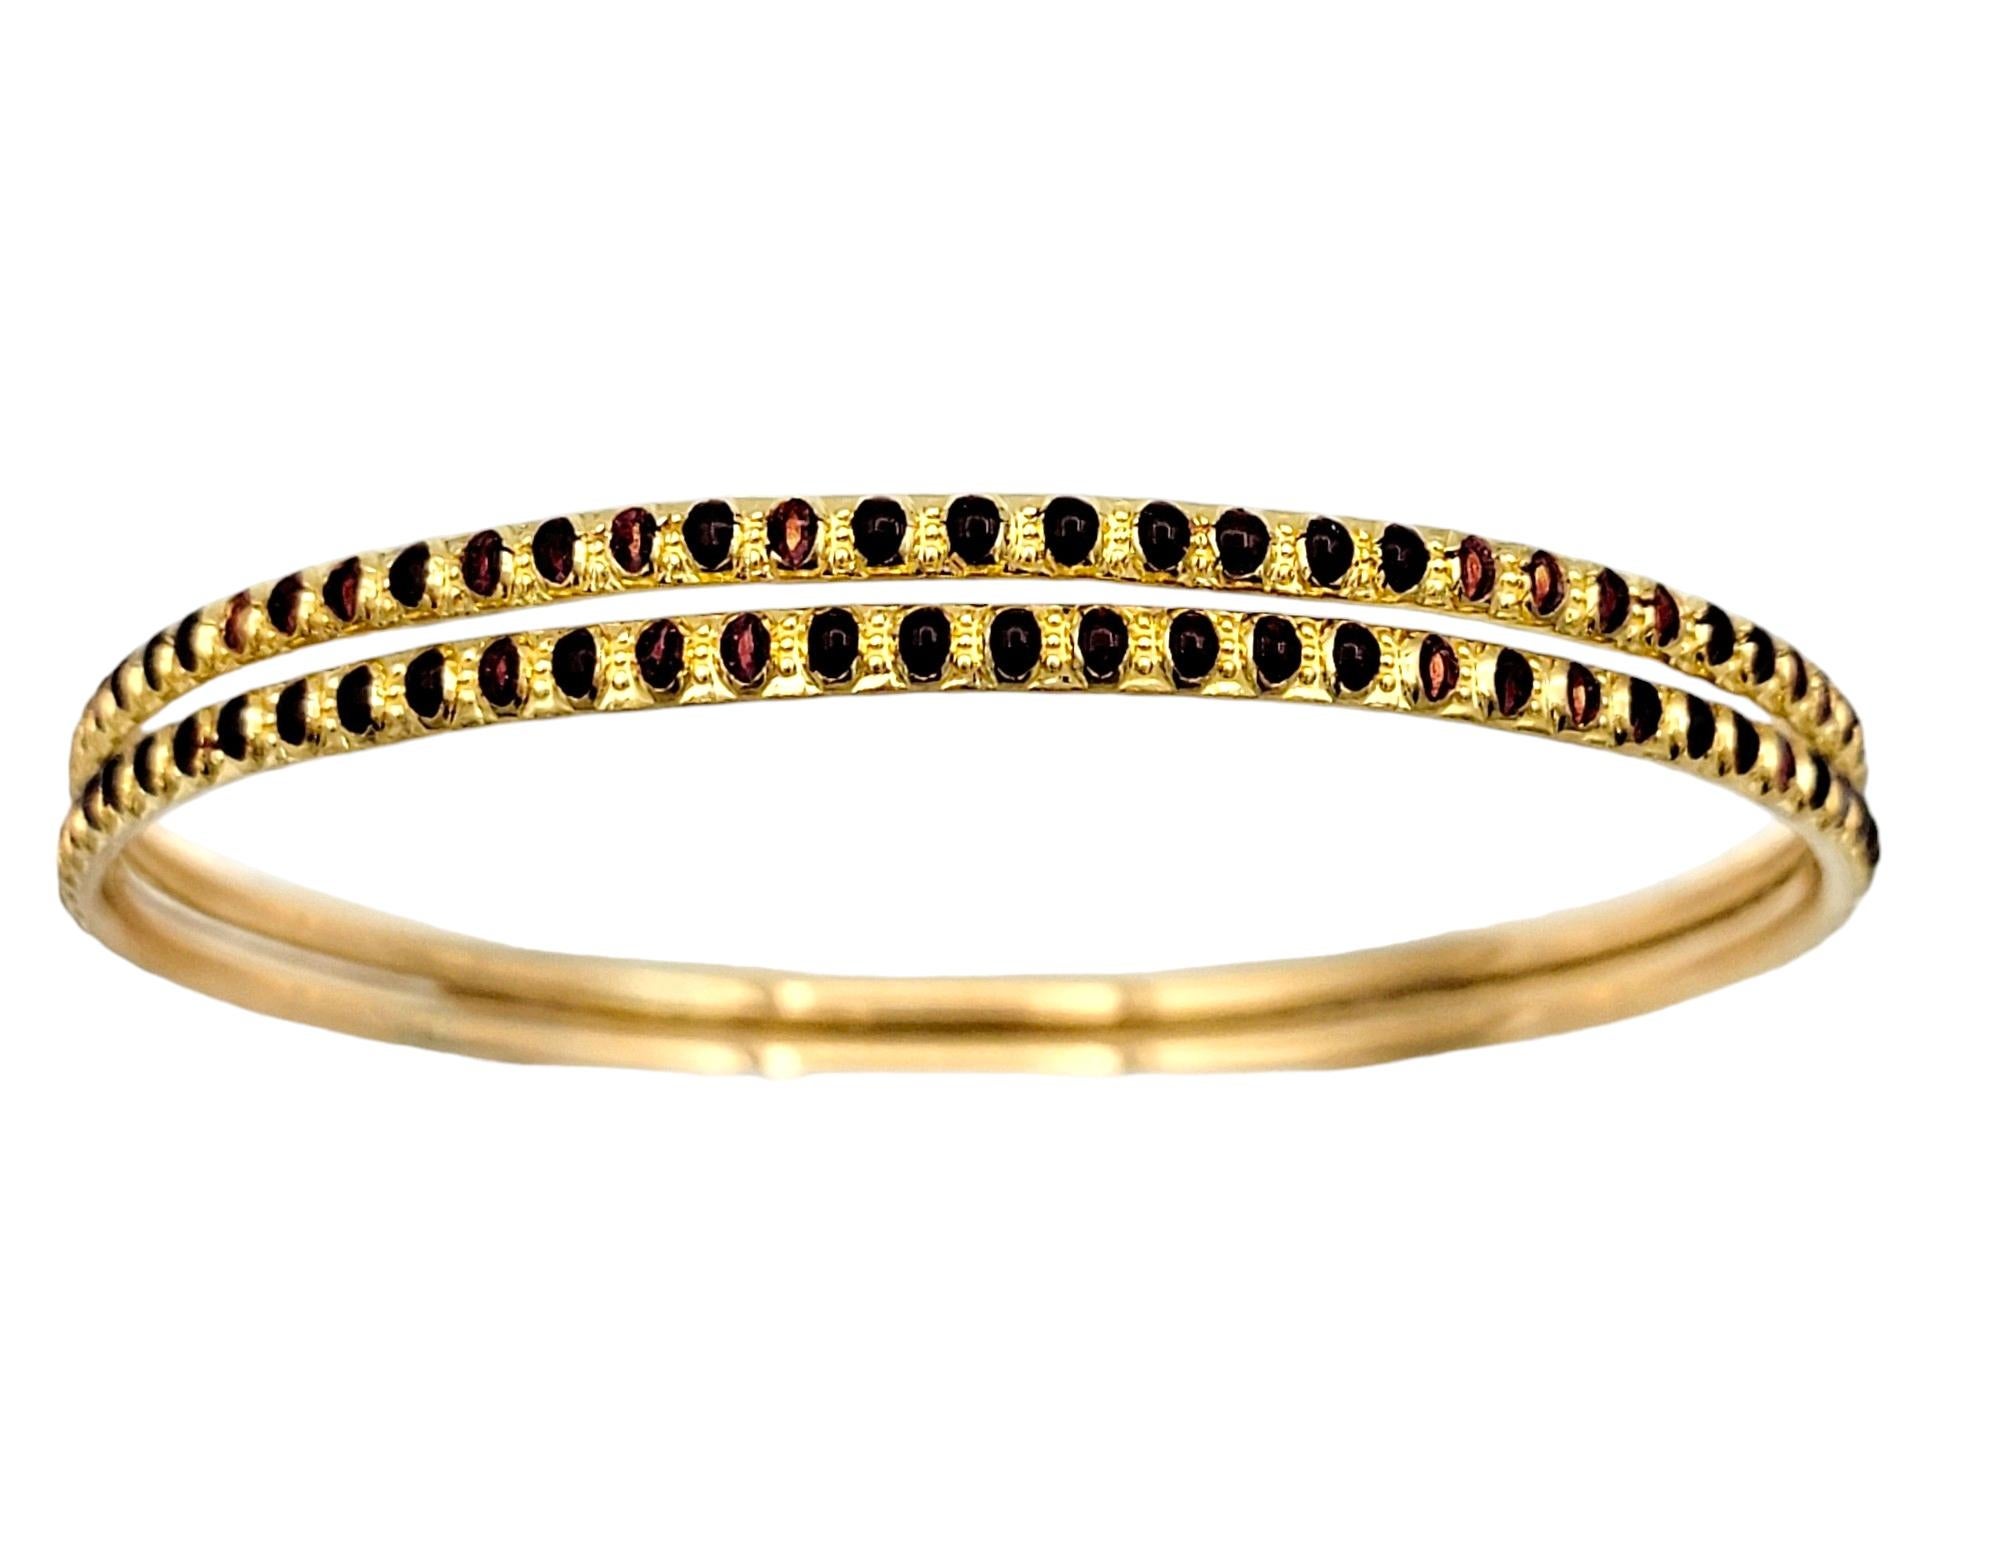 Introducing a stunning set of two narrow stacking bangle bracelets crafted in luxurious 22 karat yellow gold. These identical pieces are adorned with a mesmerizing dark red enamel dotted design that spans the entire length of the bracelets, adding a